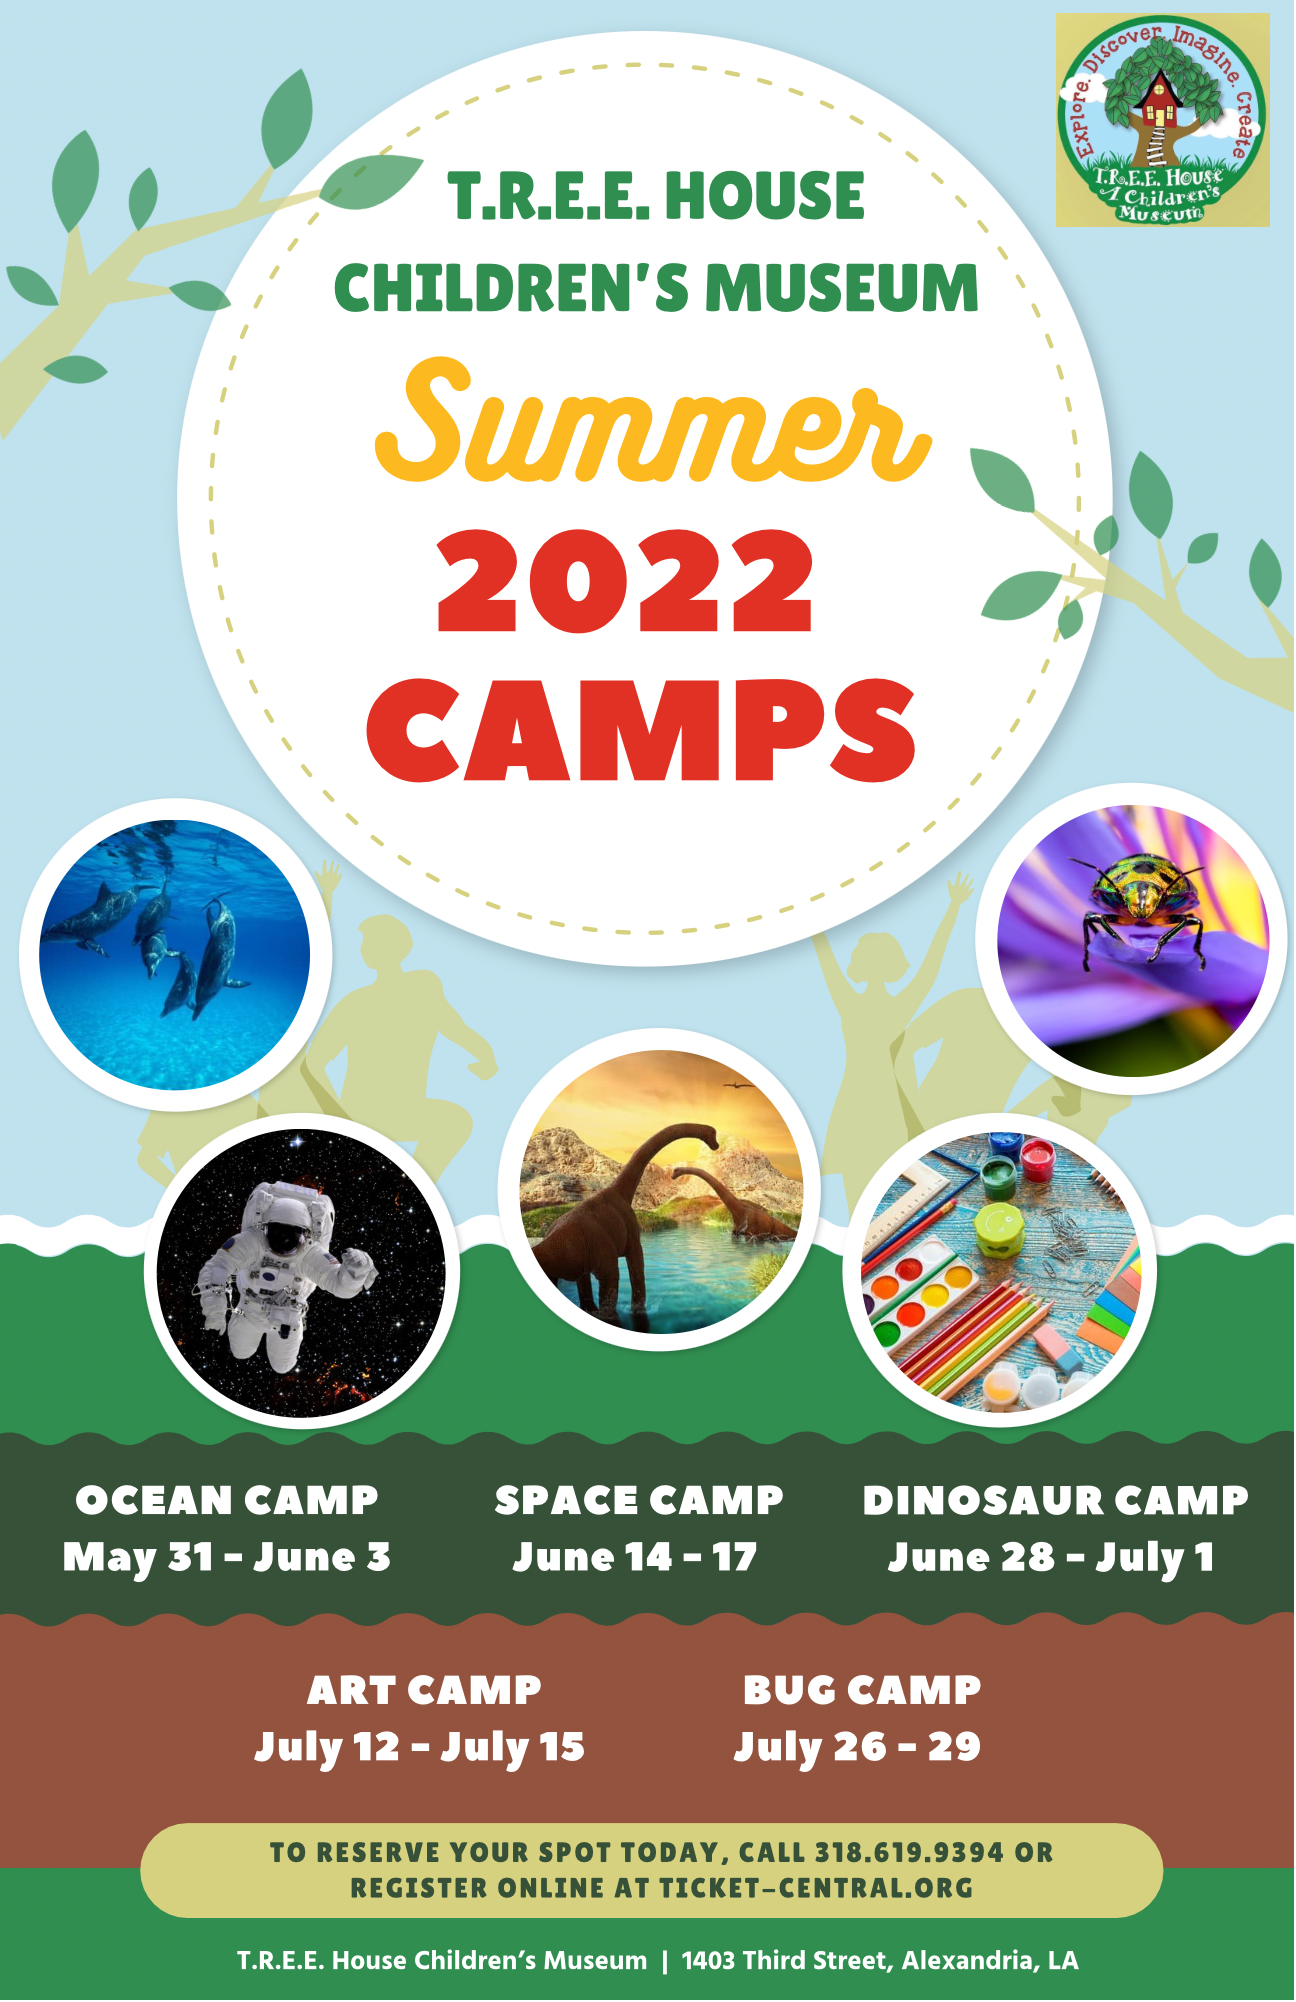 TREE HOUSE SUMMER CAMPS 2022